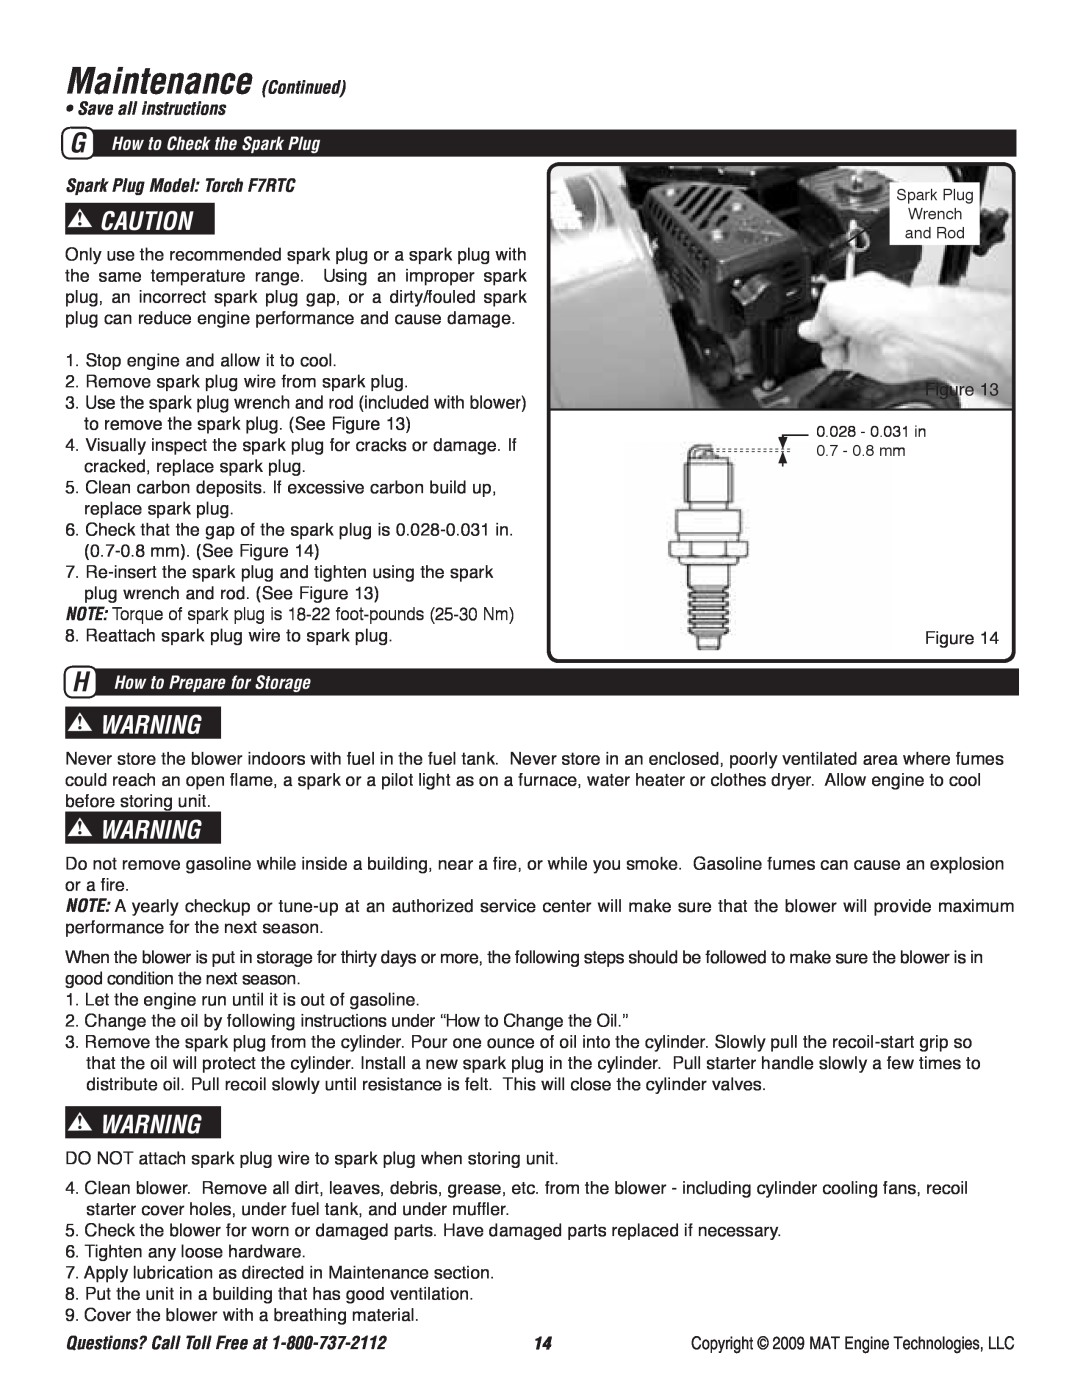 Powermate P-WB-163150-[E] specifications Maintenance Continued, • Save all instructions, G How to Check the Spark Plug 